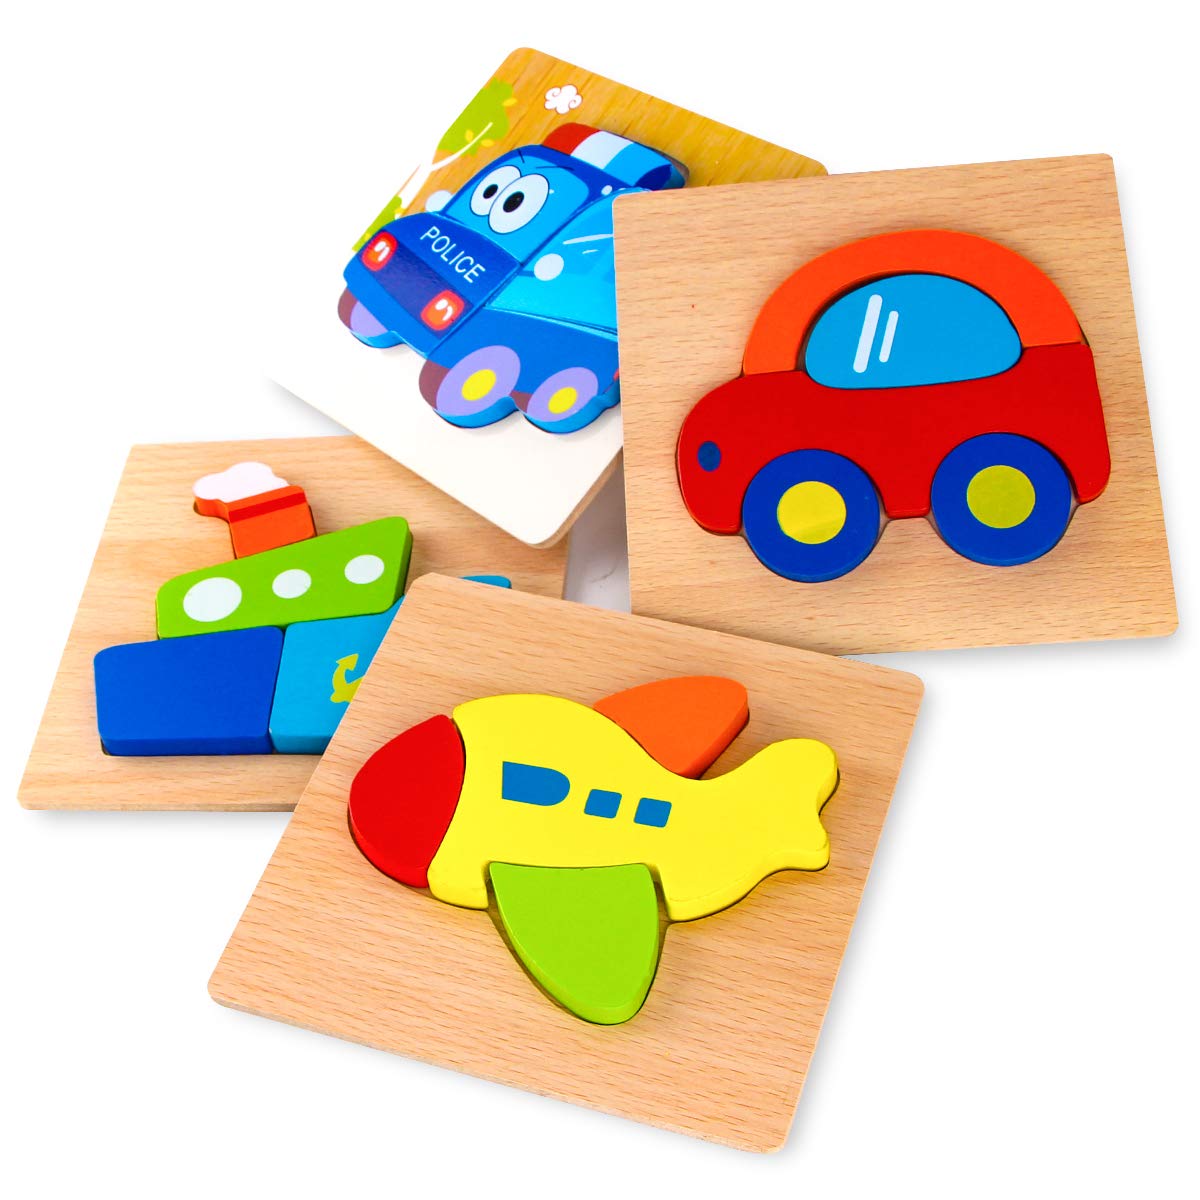 SKYFIELD Wooden Animal Puzzles for Toddlers 1 2 3 Years Old, Boys & Girls Educational Toys Gift with 4 Animal Patterns, Bright Vibrant Color Shapes, Customize Gift Box Ready